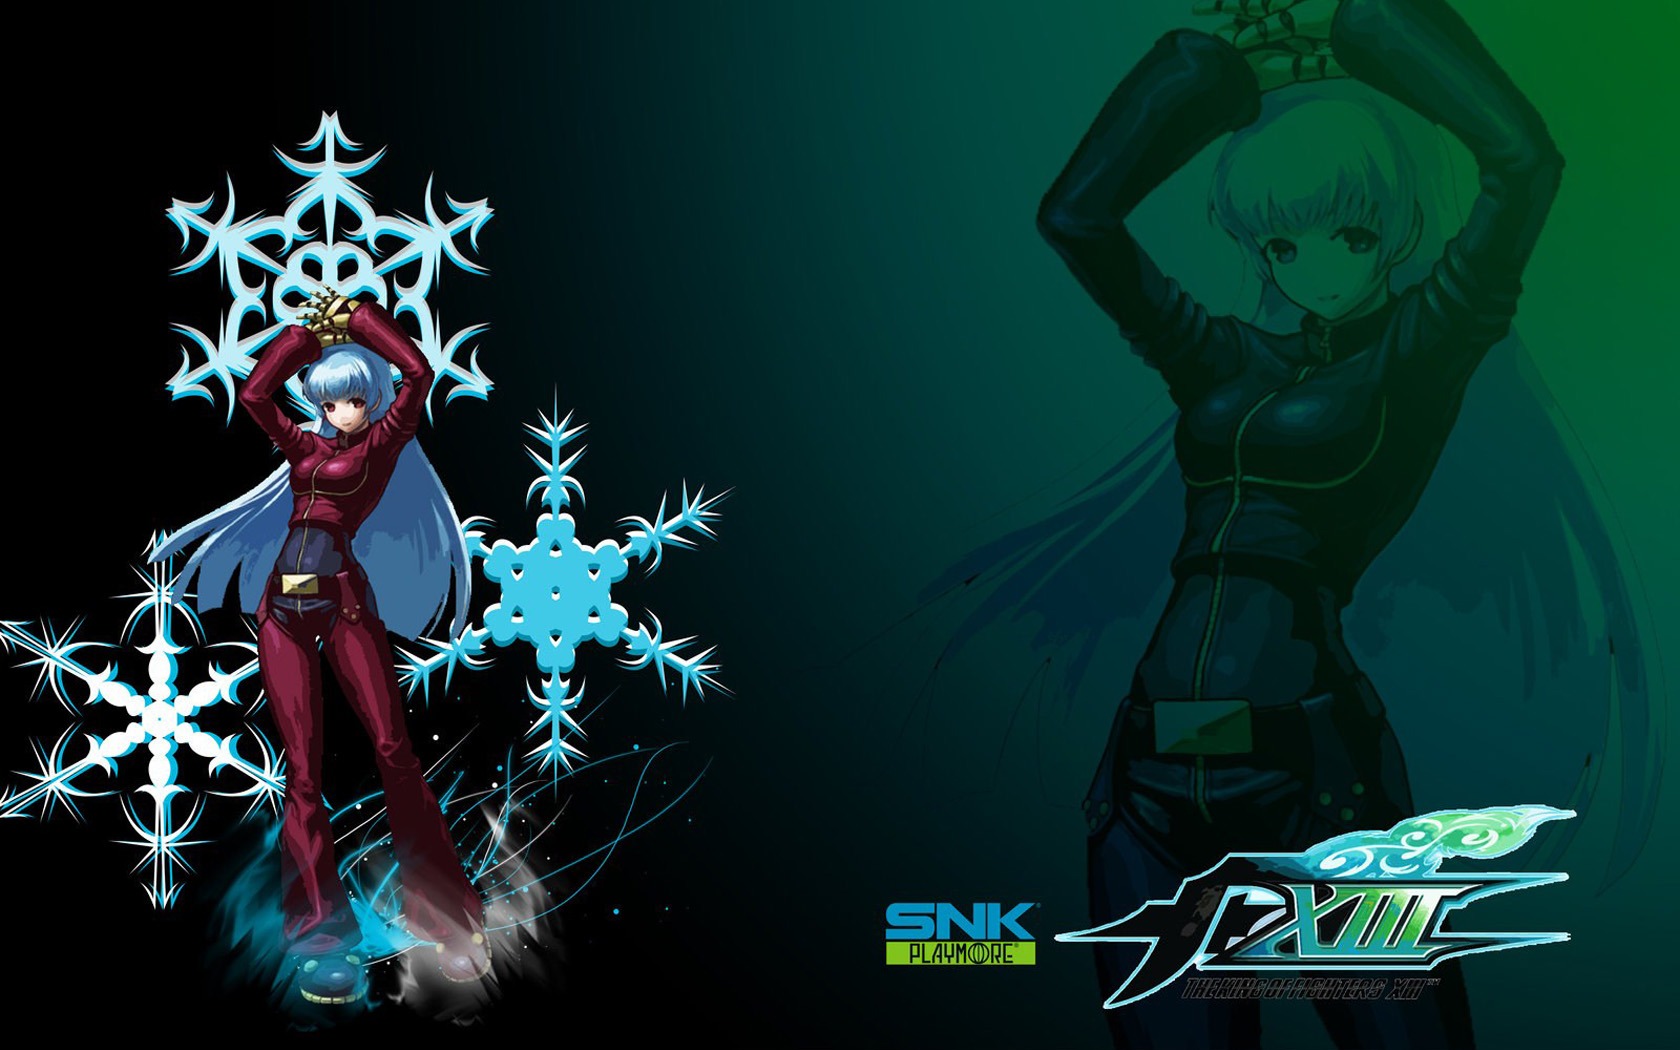 The King of Fighters XIII wallpapers #15 - 1680x1050